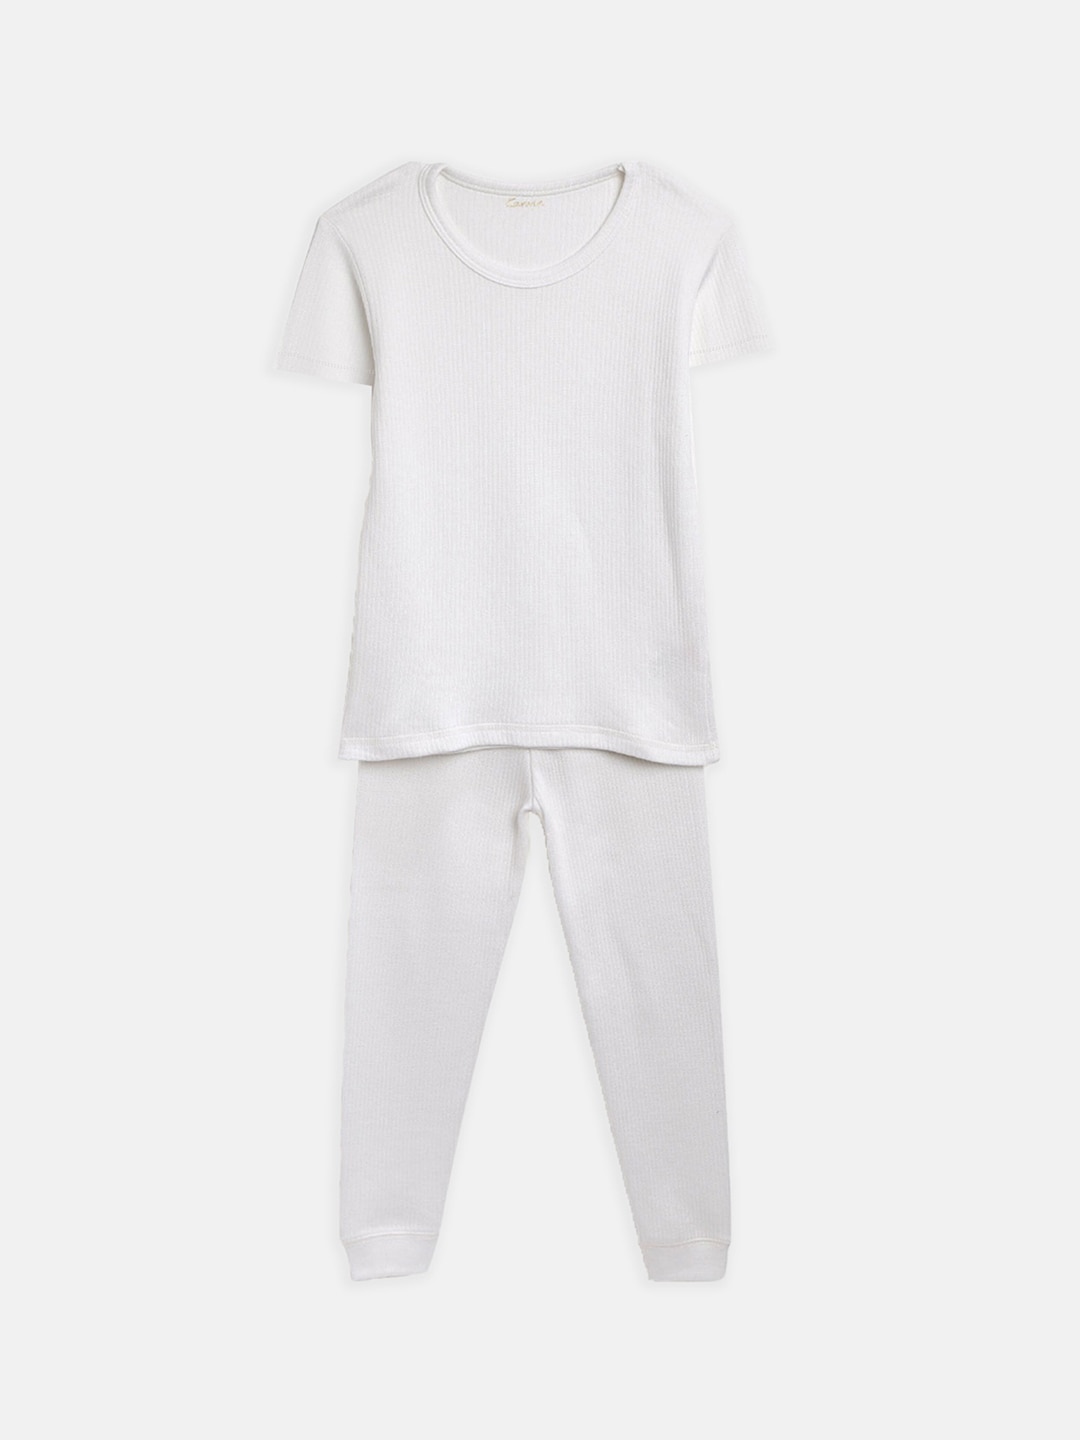 Kanvin Boys White Solid Thermal Set